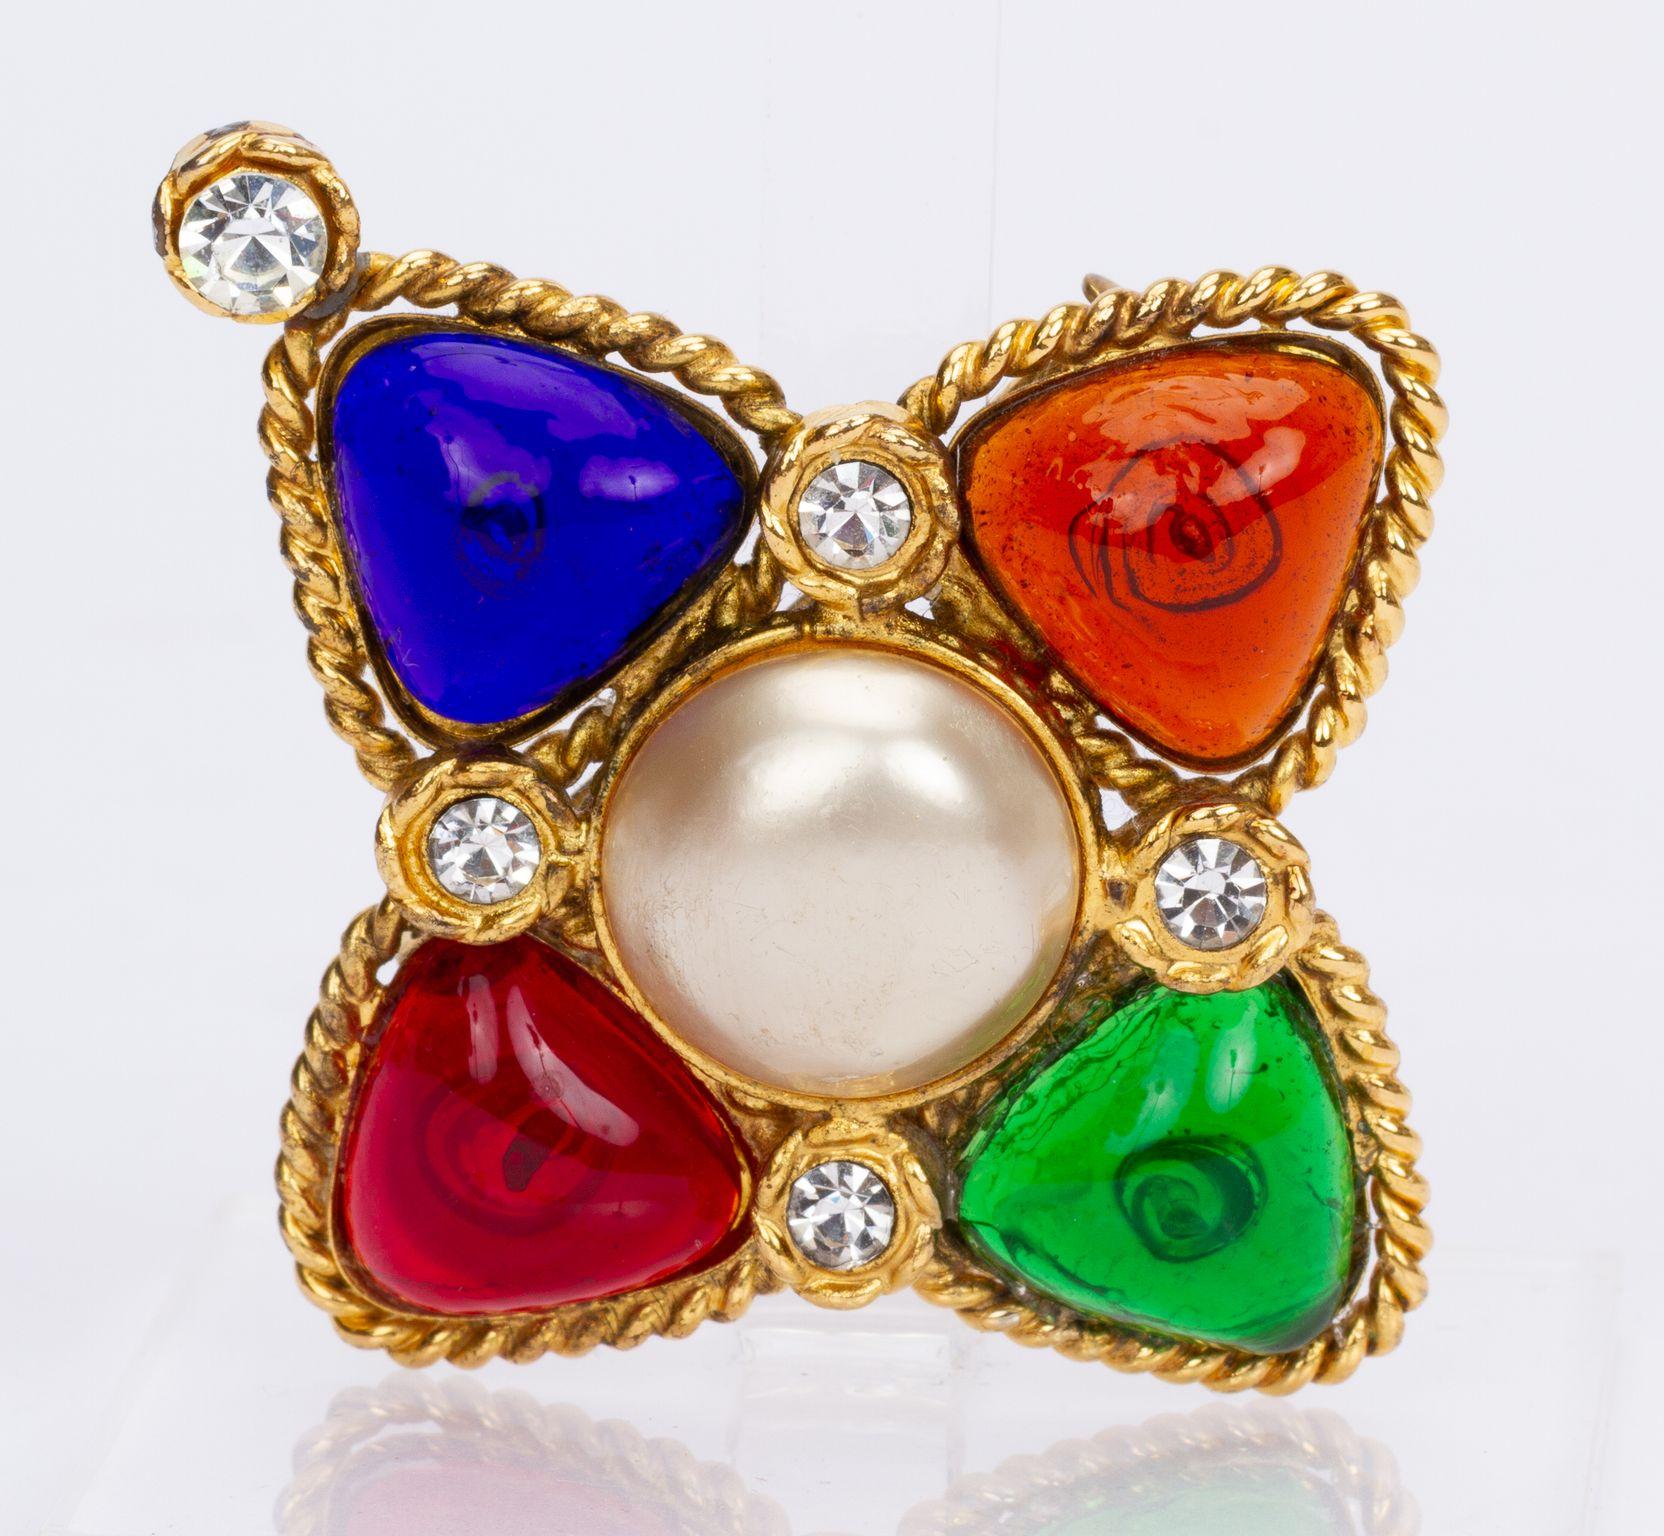 Chanel vintage brooch in gold with multicolored stones. As well as four crystals surrounding one stone in the middle. At the back of the brooch is a cc logo. The piece is in very good condition, with a small soldering in the back and comes with the